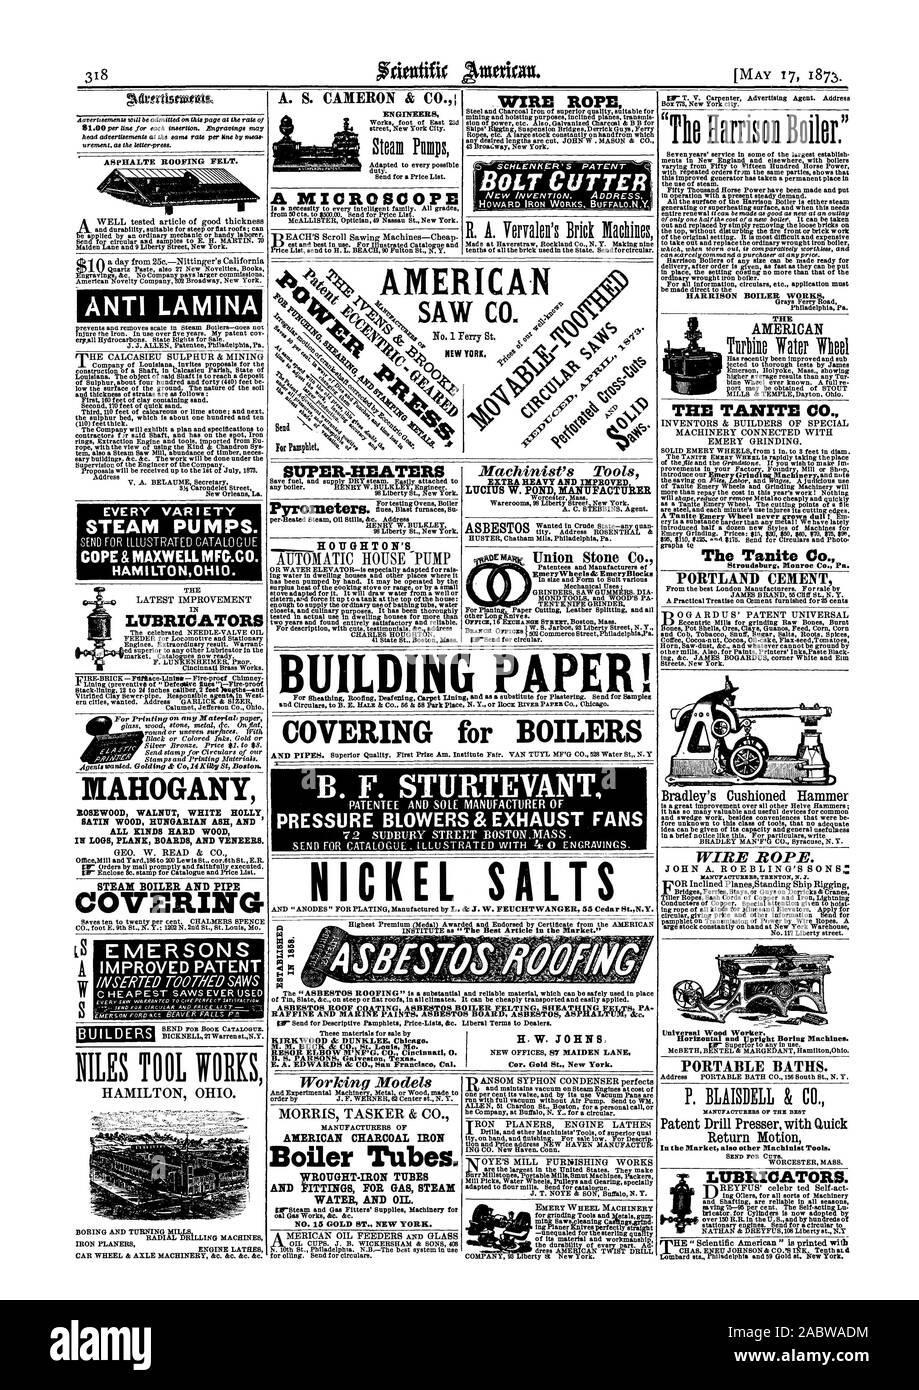 ASPHALTE ROOFING FELT. ANTI LAMINA EVERY VARIETY STEAM PUMPS. COPE&MAXWELLMFG.CO. HAMILTONOH10. EMERSONS IMPROVED PATENT A. S. CAMERON & C A MICROSCOPE SUPER-HEATERS ometers. HOUGHTON'S 'The Harrison Boiler.' HARRISON BOILER WORKS THE AMERICAN THE TANITE CO. The Tanite Co. Stroudsburg Monroe Co. Pa. PORTLAND CEMENT WIRE ROPE. PORTABLE BATHS. In the Market also other Machinist Tools. LUBRICATORS. MAHOGANY ROSEWOOD WALNUT WHITE HOLLY SATIN WOOD HUNGARIAN ASH AND ALL laNDS HARD WOOD IN LOGS PLANK BOARDS AND VENEERS. STEAM BOILER AND PIPE COVERING WIRE ROPE BOLT CUTTER LUBRICATORS BUILDERS F.1 Stock Photo